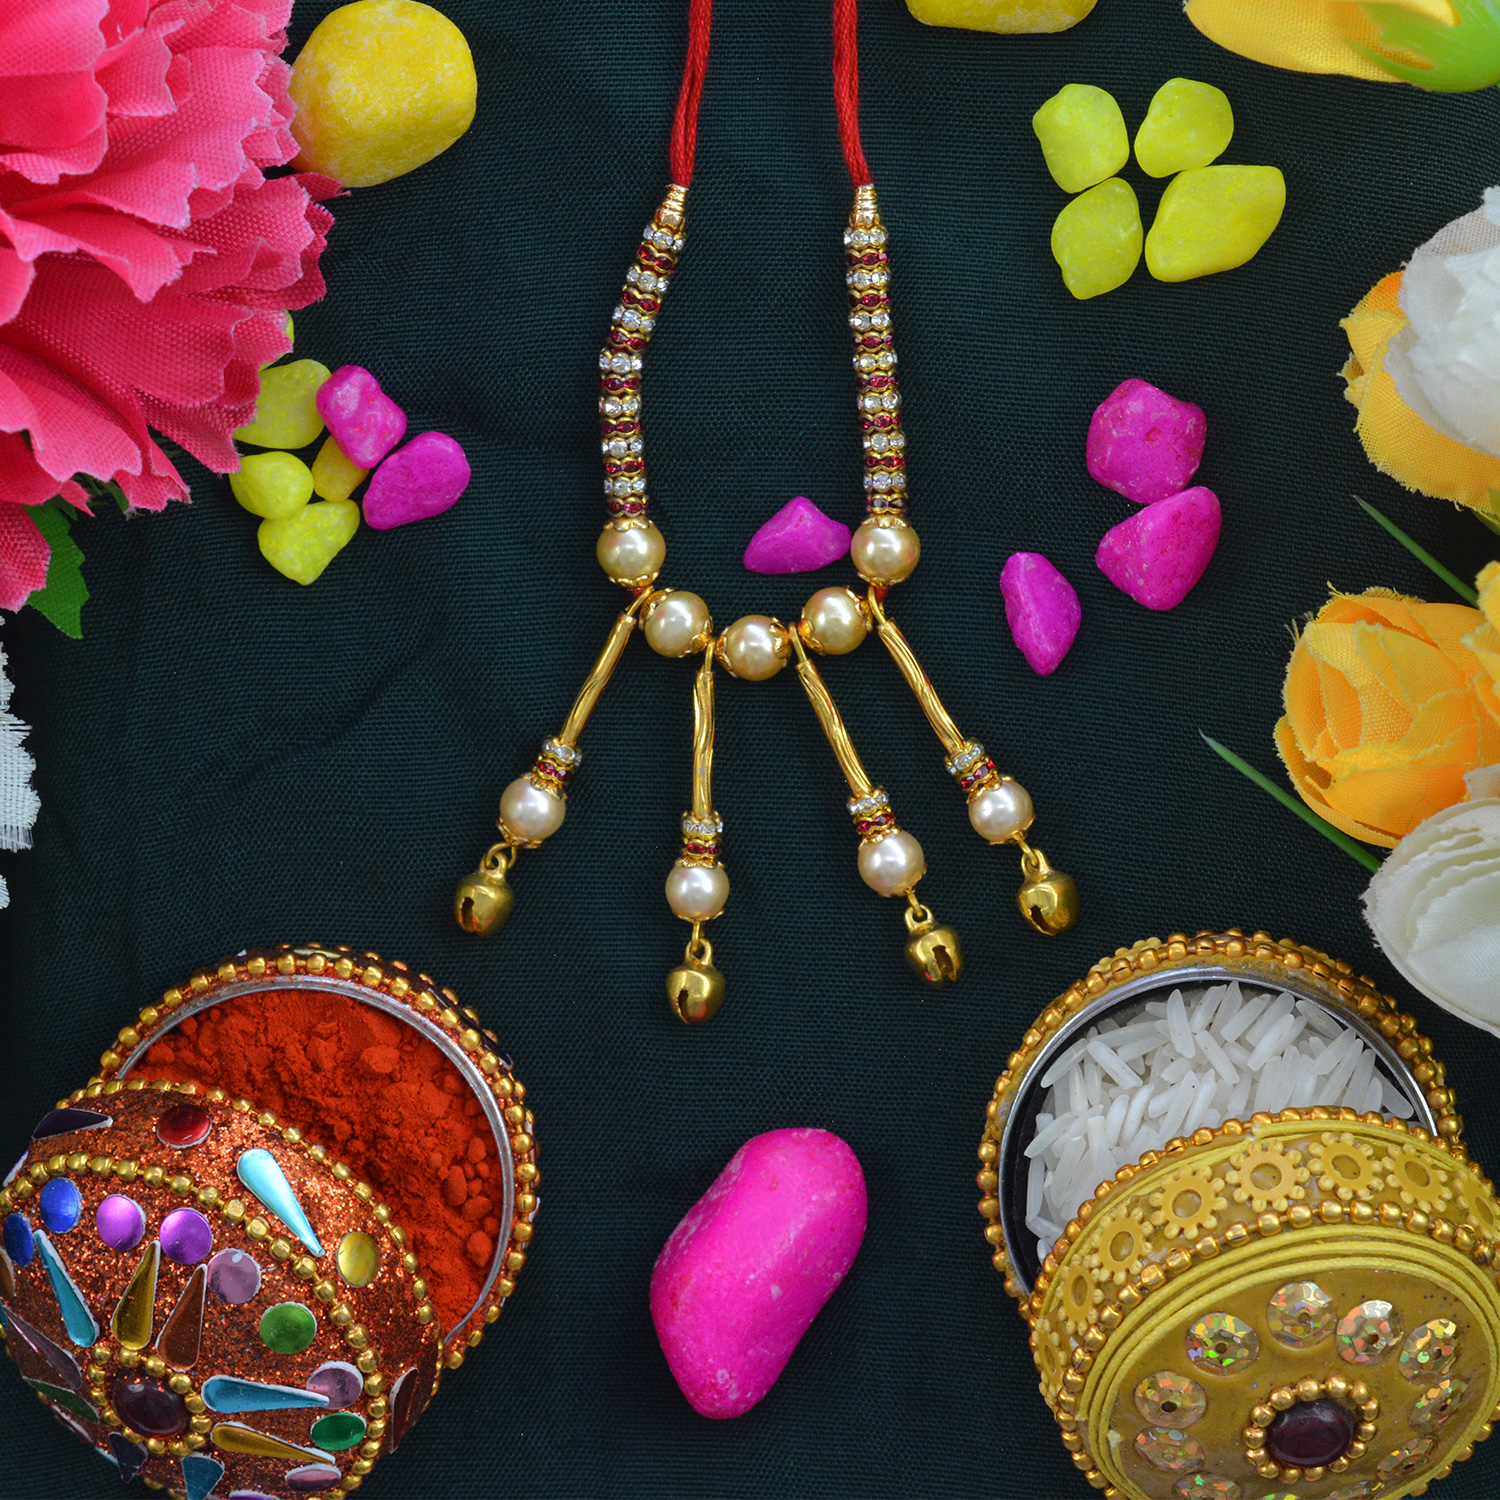 Attractive Rich Looking Two Sided Hanging Beads Lumba Rakhi For Bhabhi